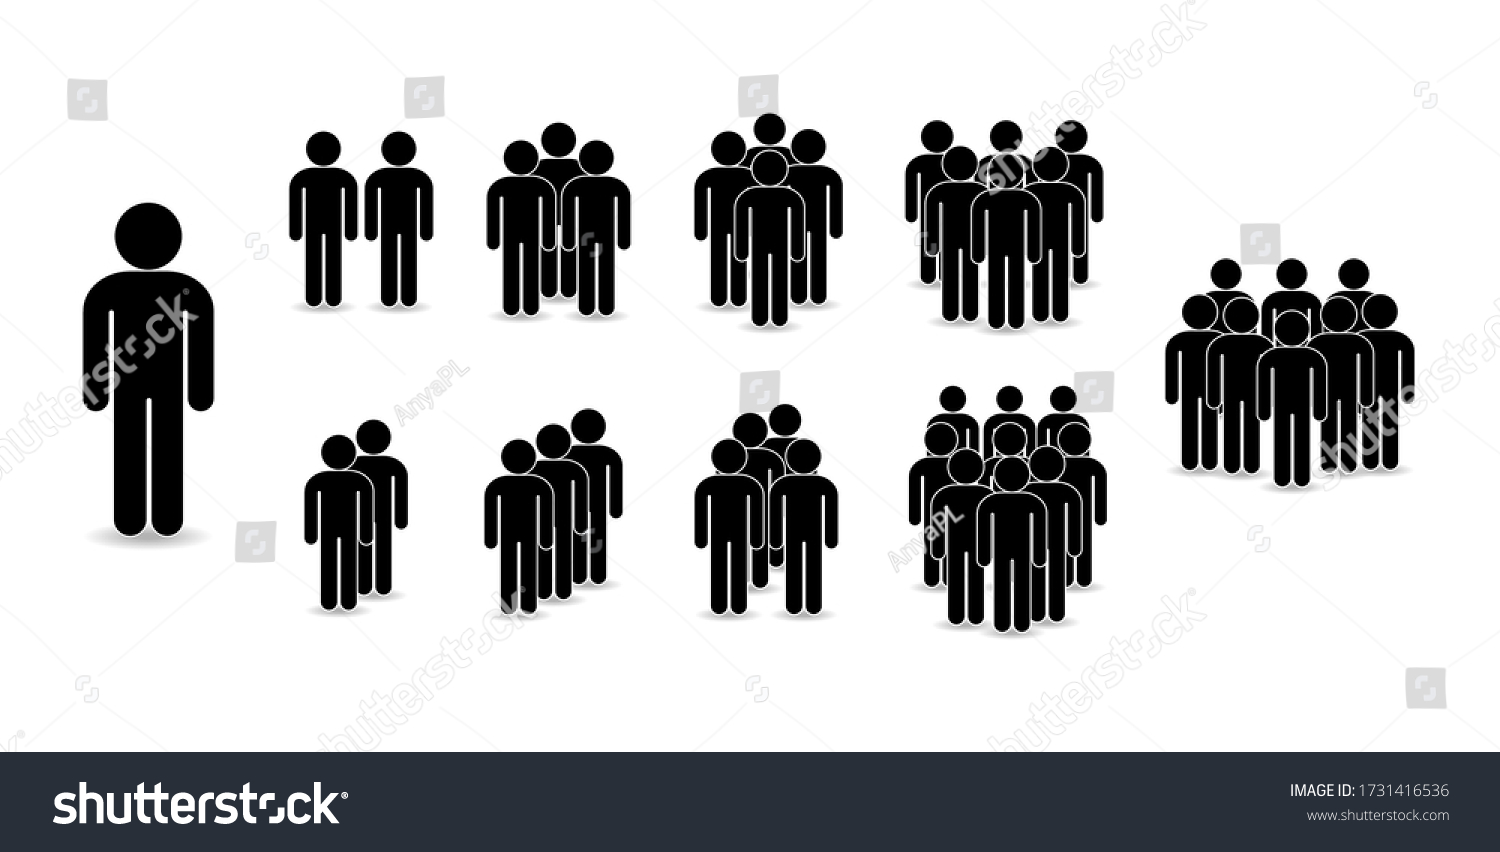 Set of people icons in flat style. Crowd. Group of people - icon. Company or team person #1731416536